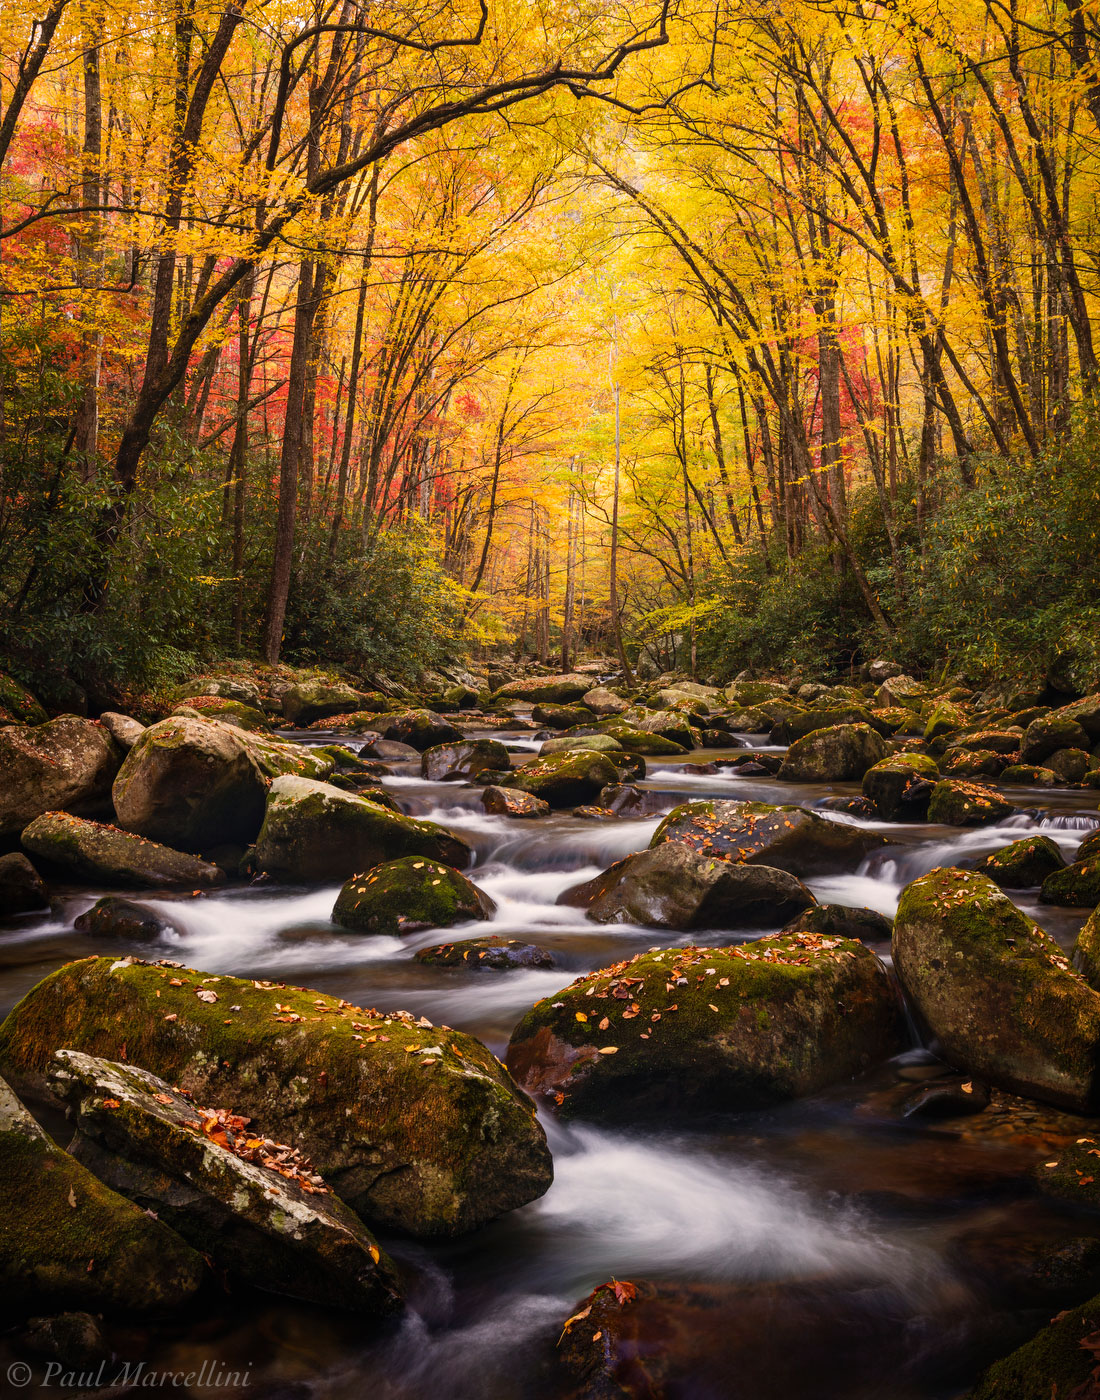 A stream winds its way through a maze of rocks under a cathedral of fall colors in the Smokies.